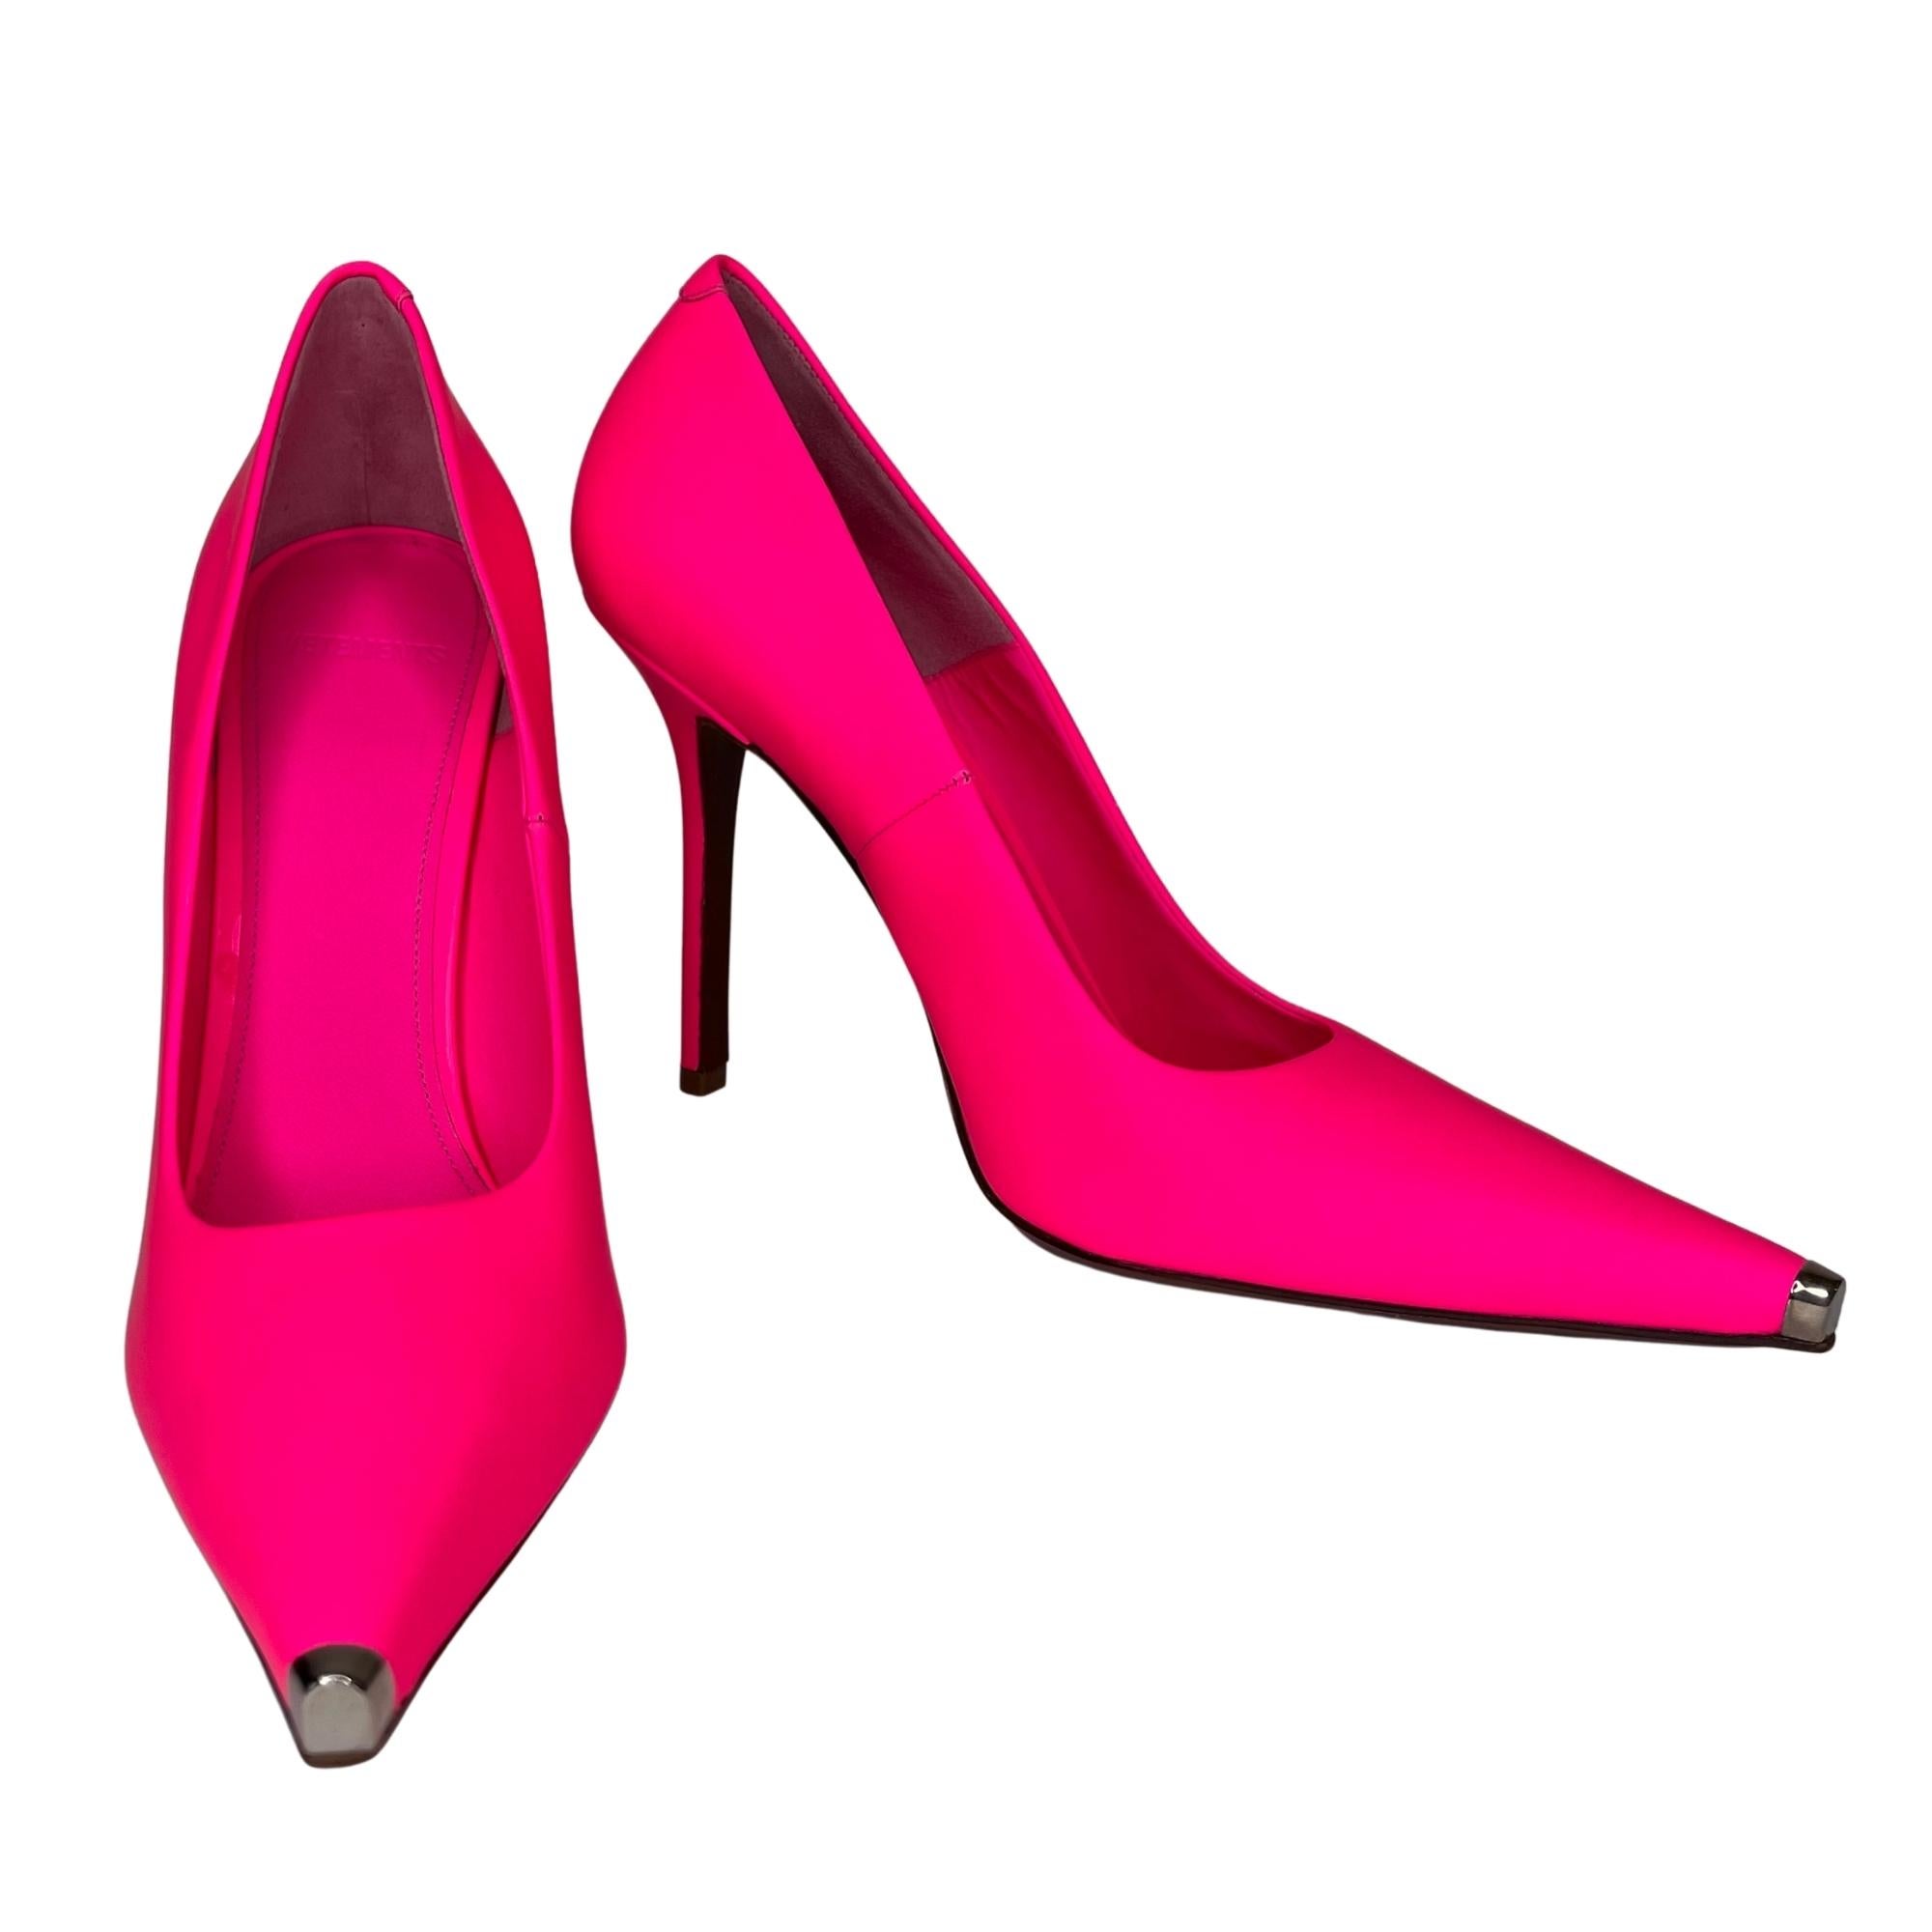 Pink leather 110-mm Décolleté pumps featuring a pointed toe, a slip-on style, a high stiletto heel, a gold-tone cap toe and leather sole and leather lining.
Designer Style ID: SS20HE009

COLOR: Pink
MATERIAL: Rubberized leather
SIZE: 39 EU / 8